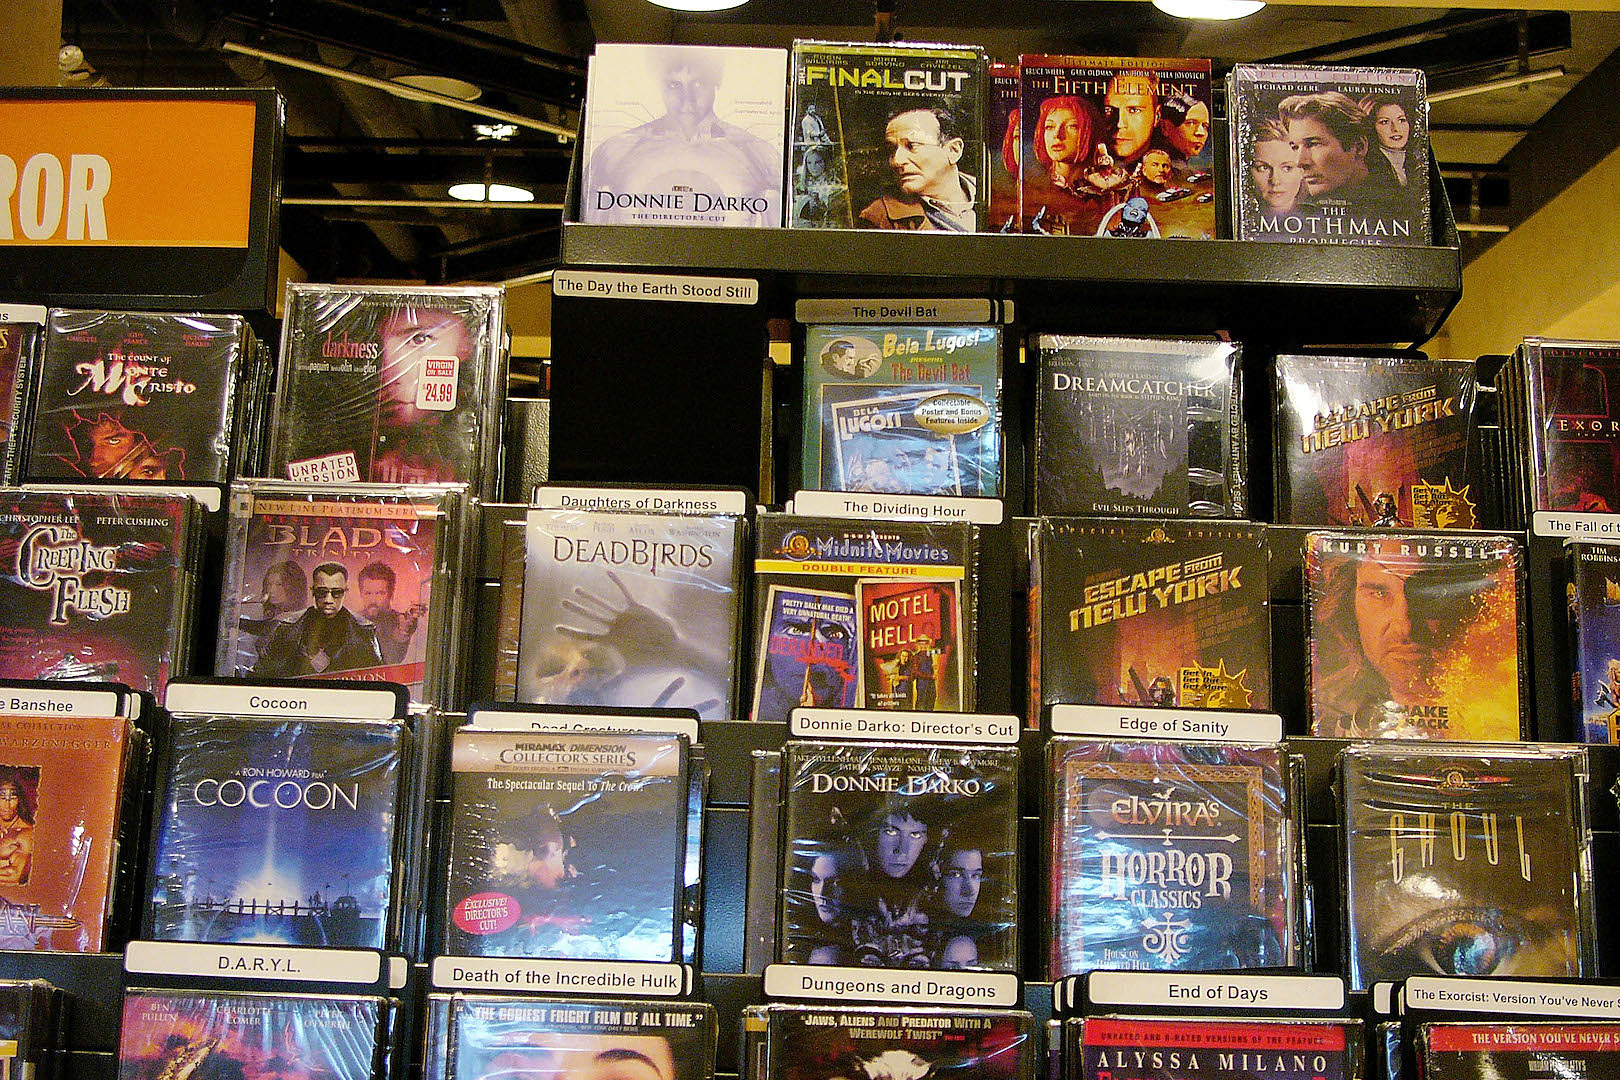 DVDs for Sale, Buy New Movies DVD Releases